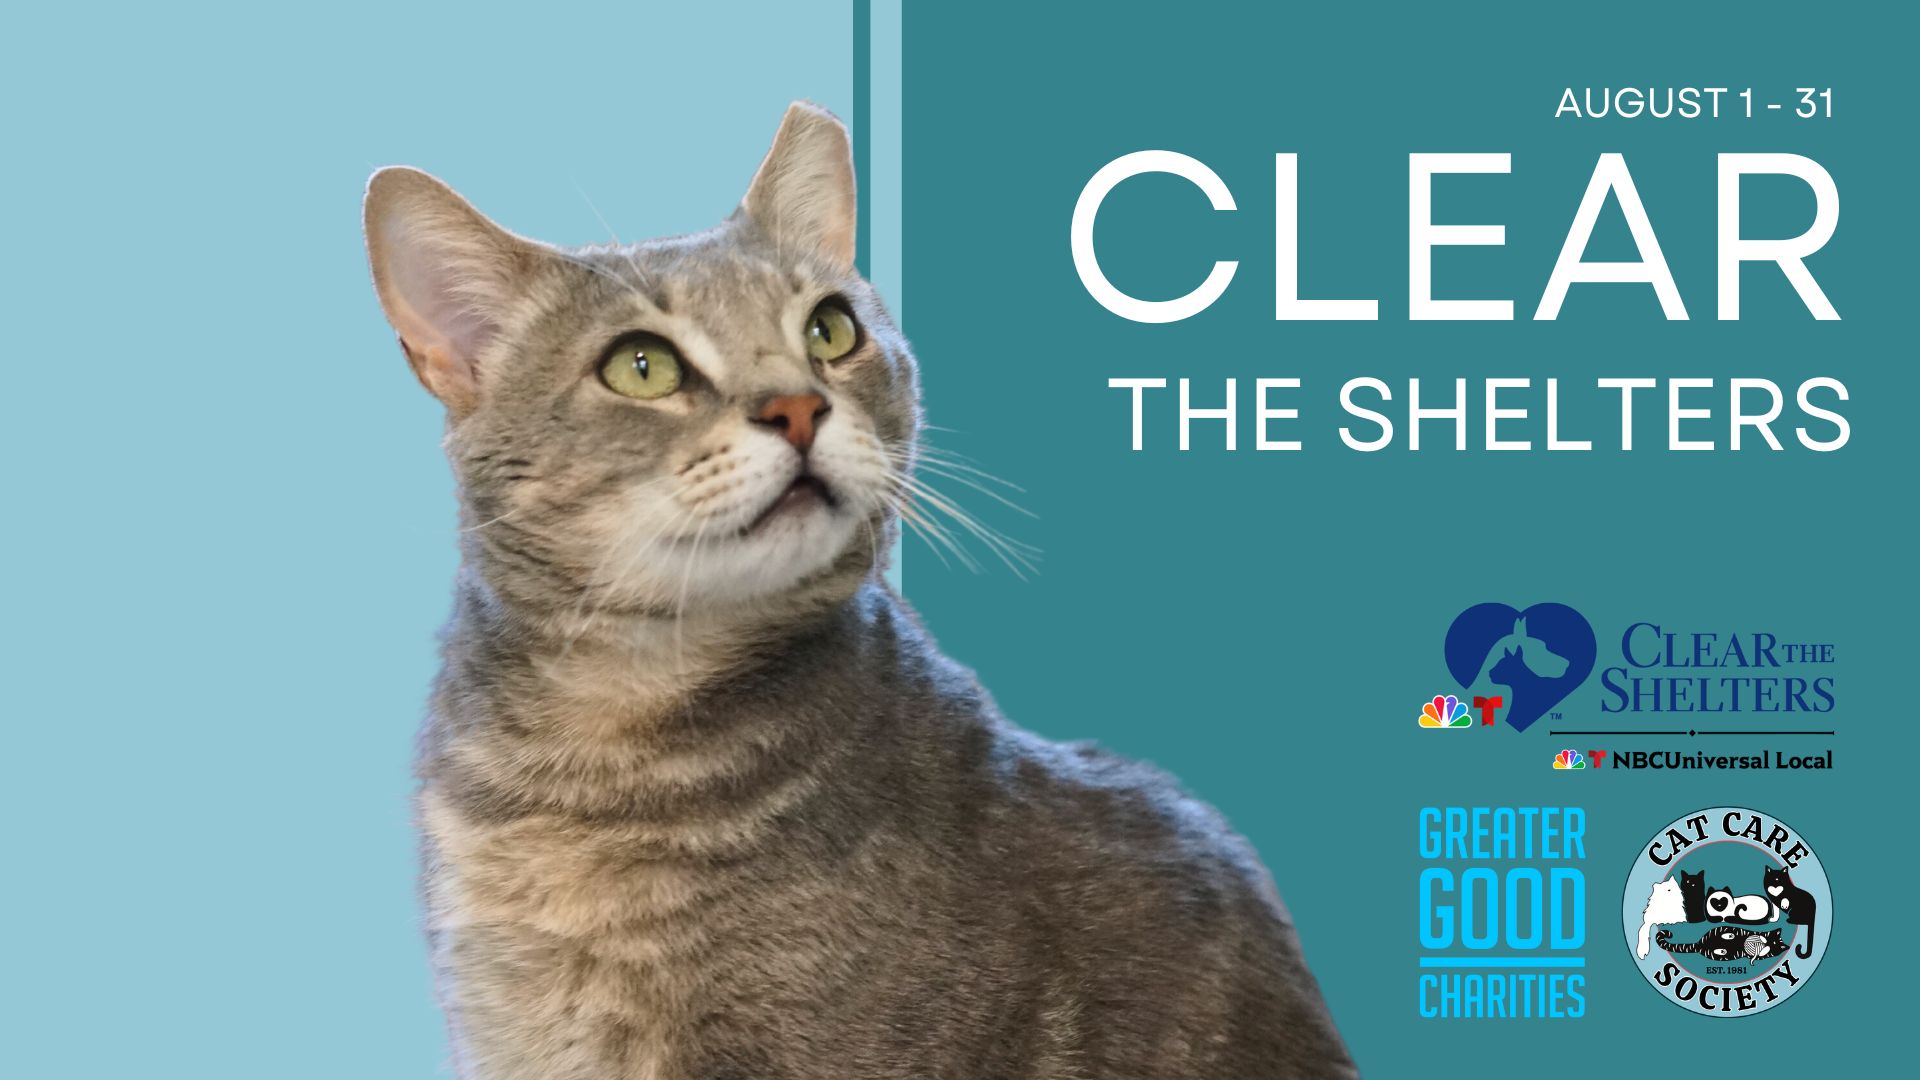 clear the shelters promotional banner showing a gray cat next to text that says Clear the Shelters